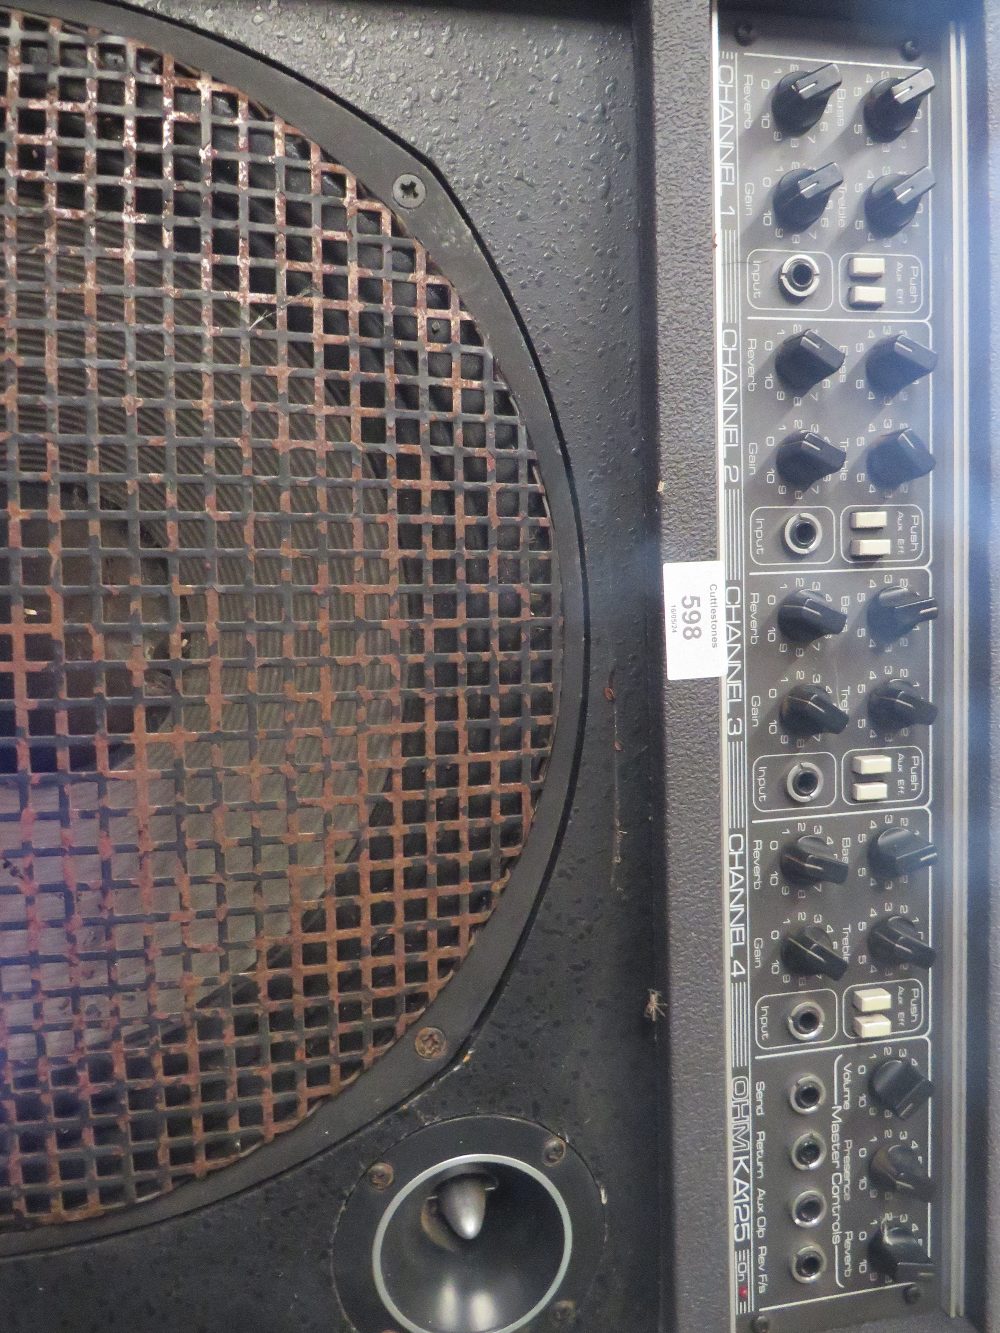 AN OHM DISCO AMP SPEAKER WITH BUILT IN AMP - Image 2 of 2